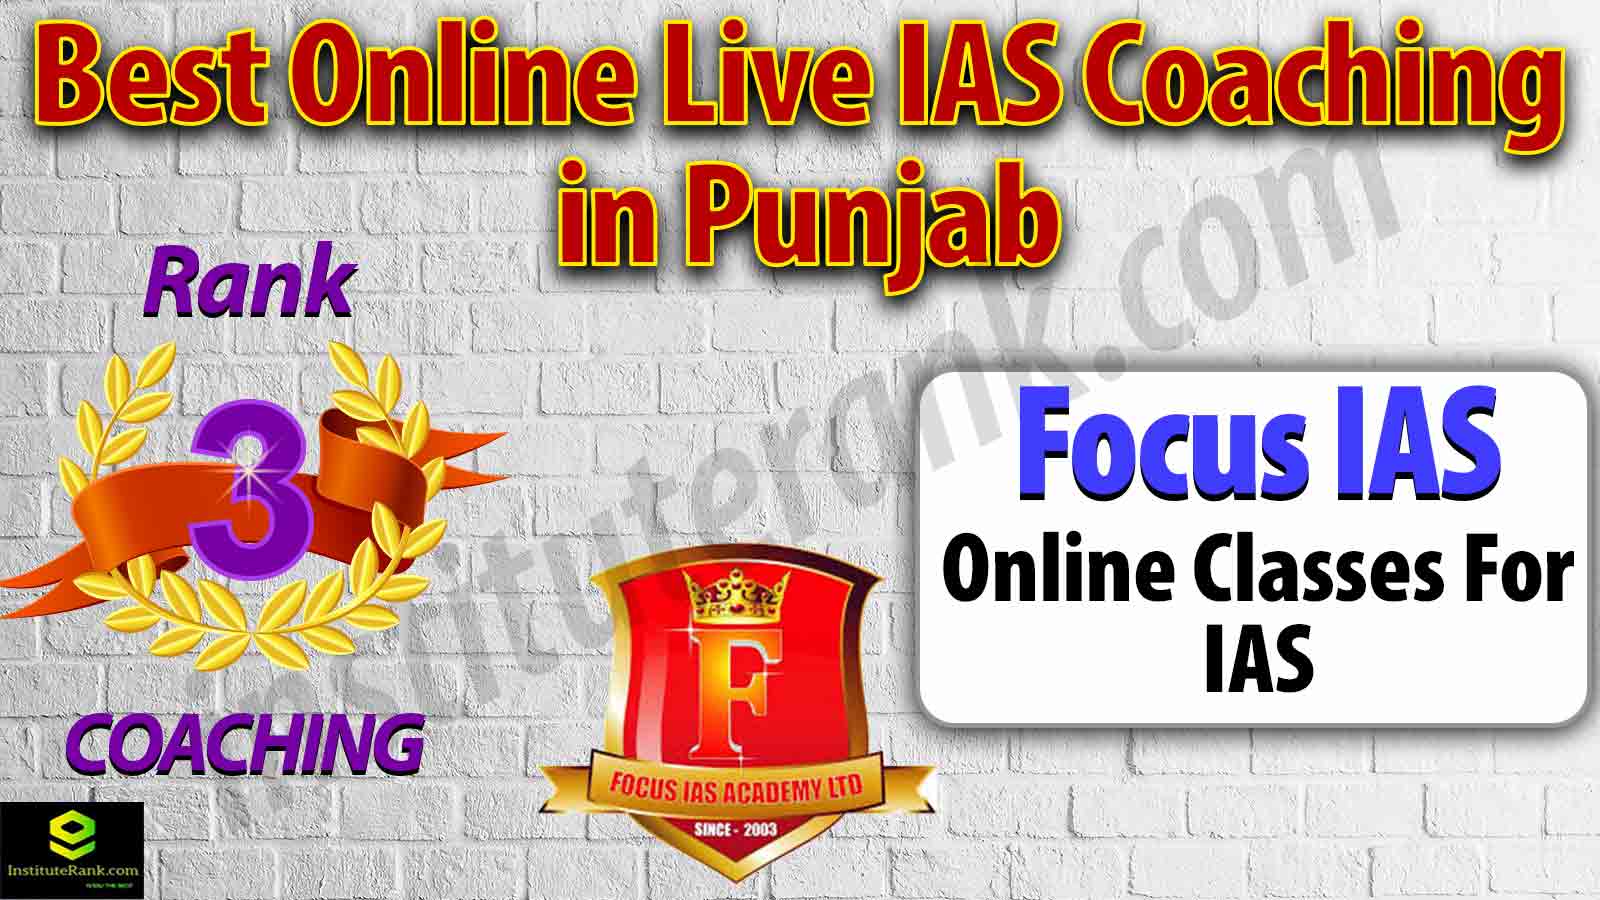 Top Online live IAS Coaching Centre in Punjab